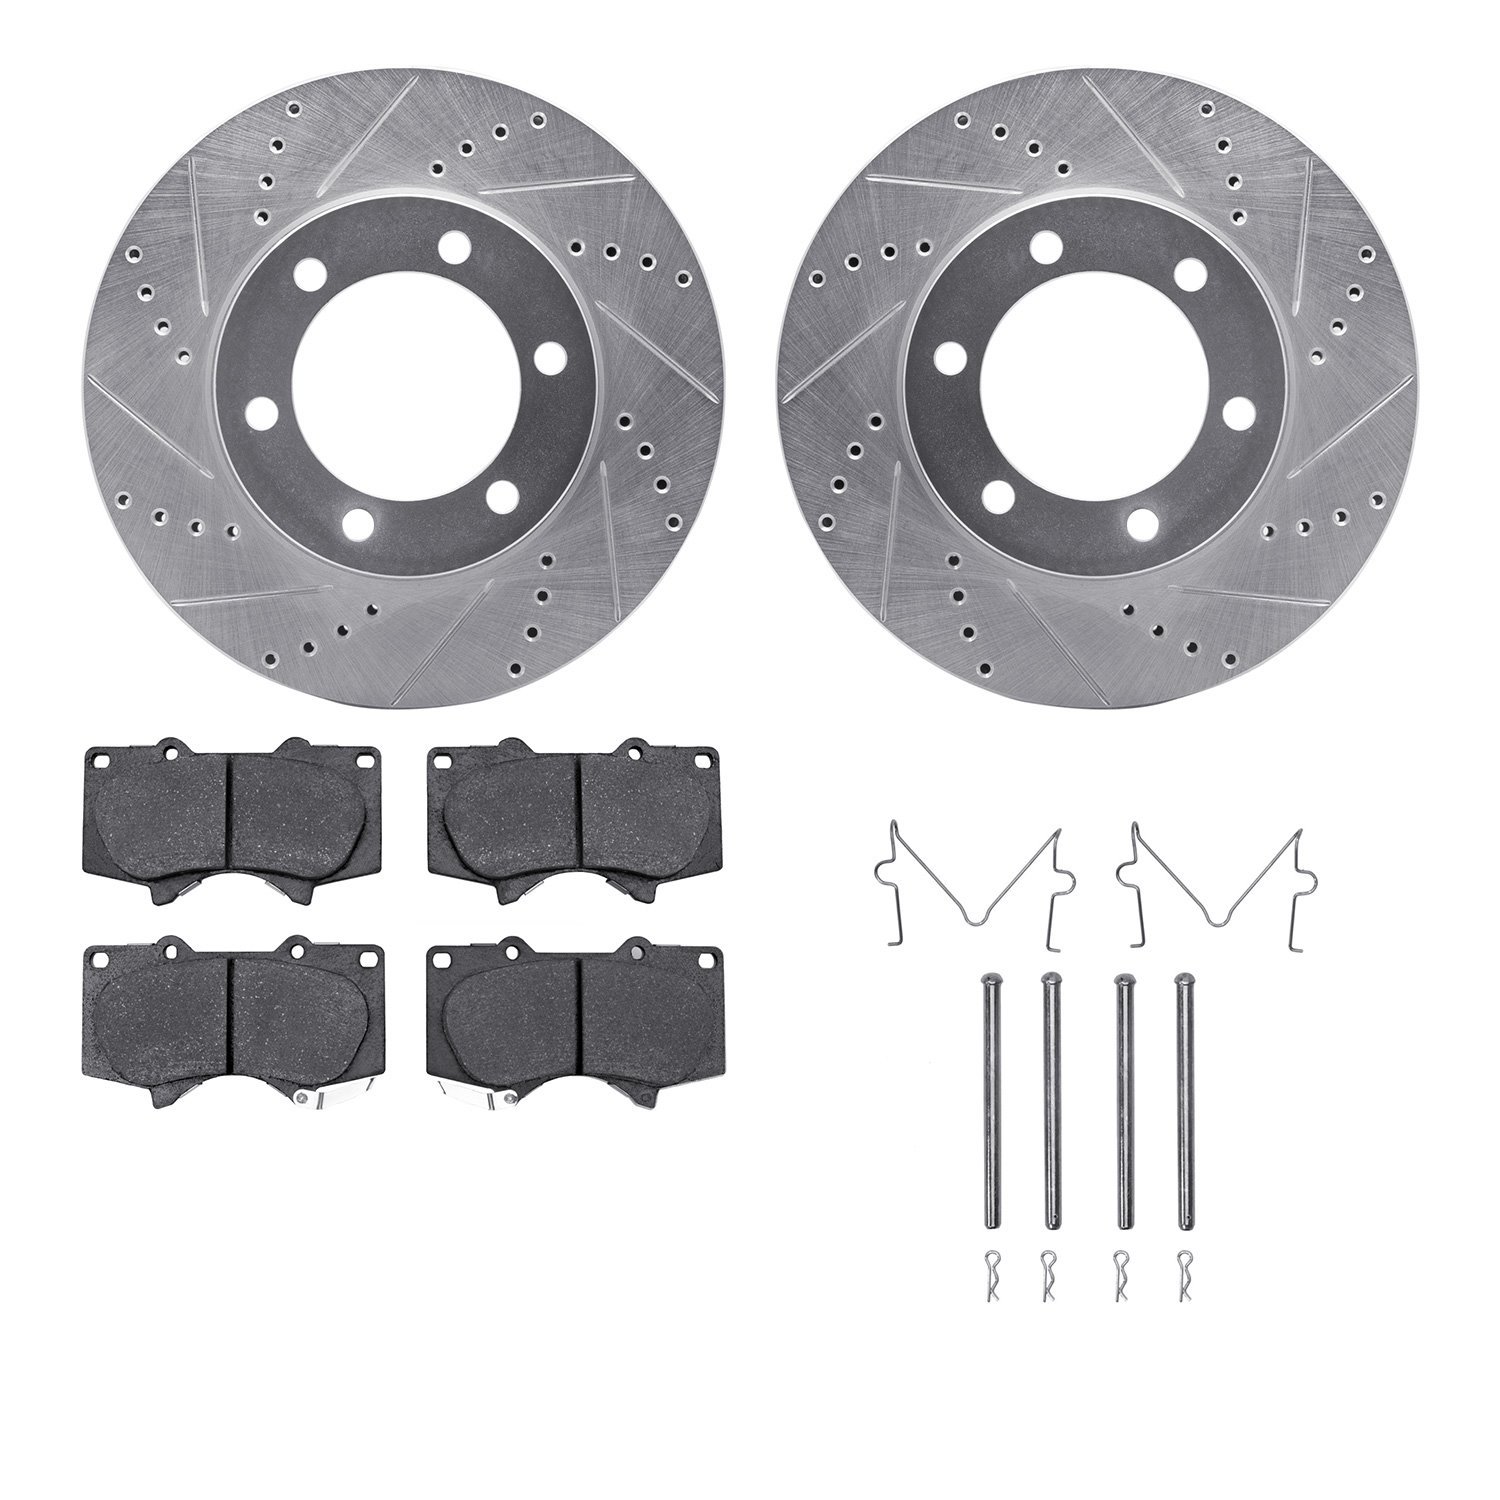 7412-76014 Drilled/Slotted Brake Rotors with Ultimate-Duty Brake Pads Kit & Hardware [Silver], 2000-2007 Lexus/Toyota/Scion, Pos